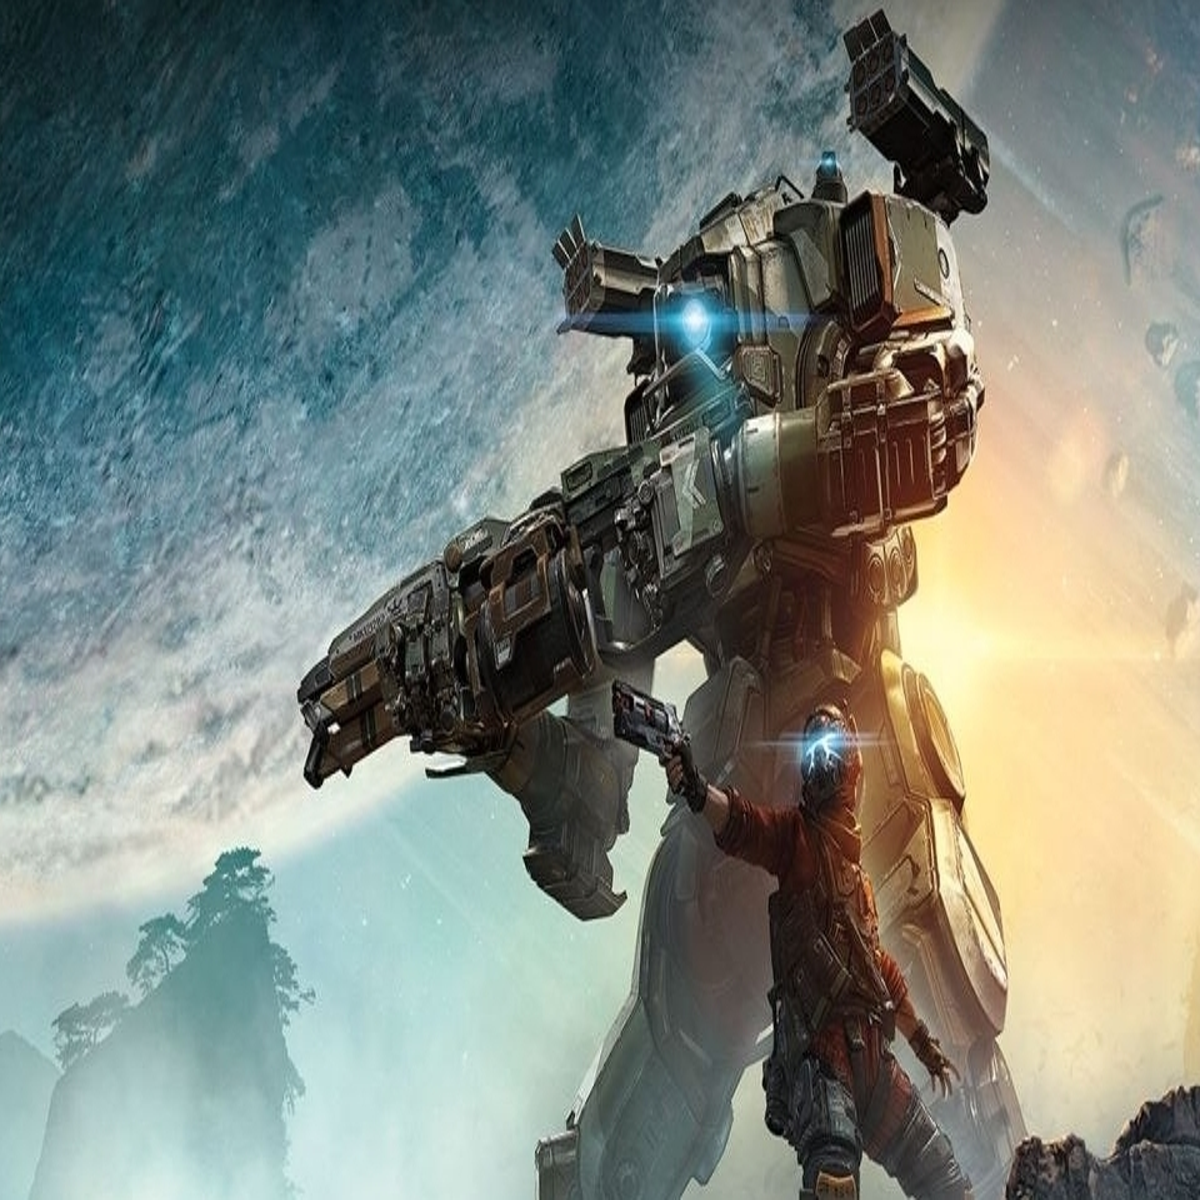 Respawn brings Titanfall to iOS with a new PvP RTS game - 9to5Mac